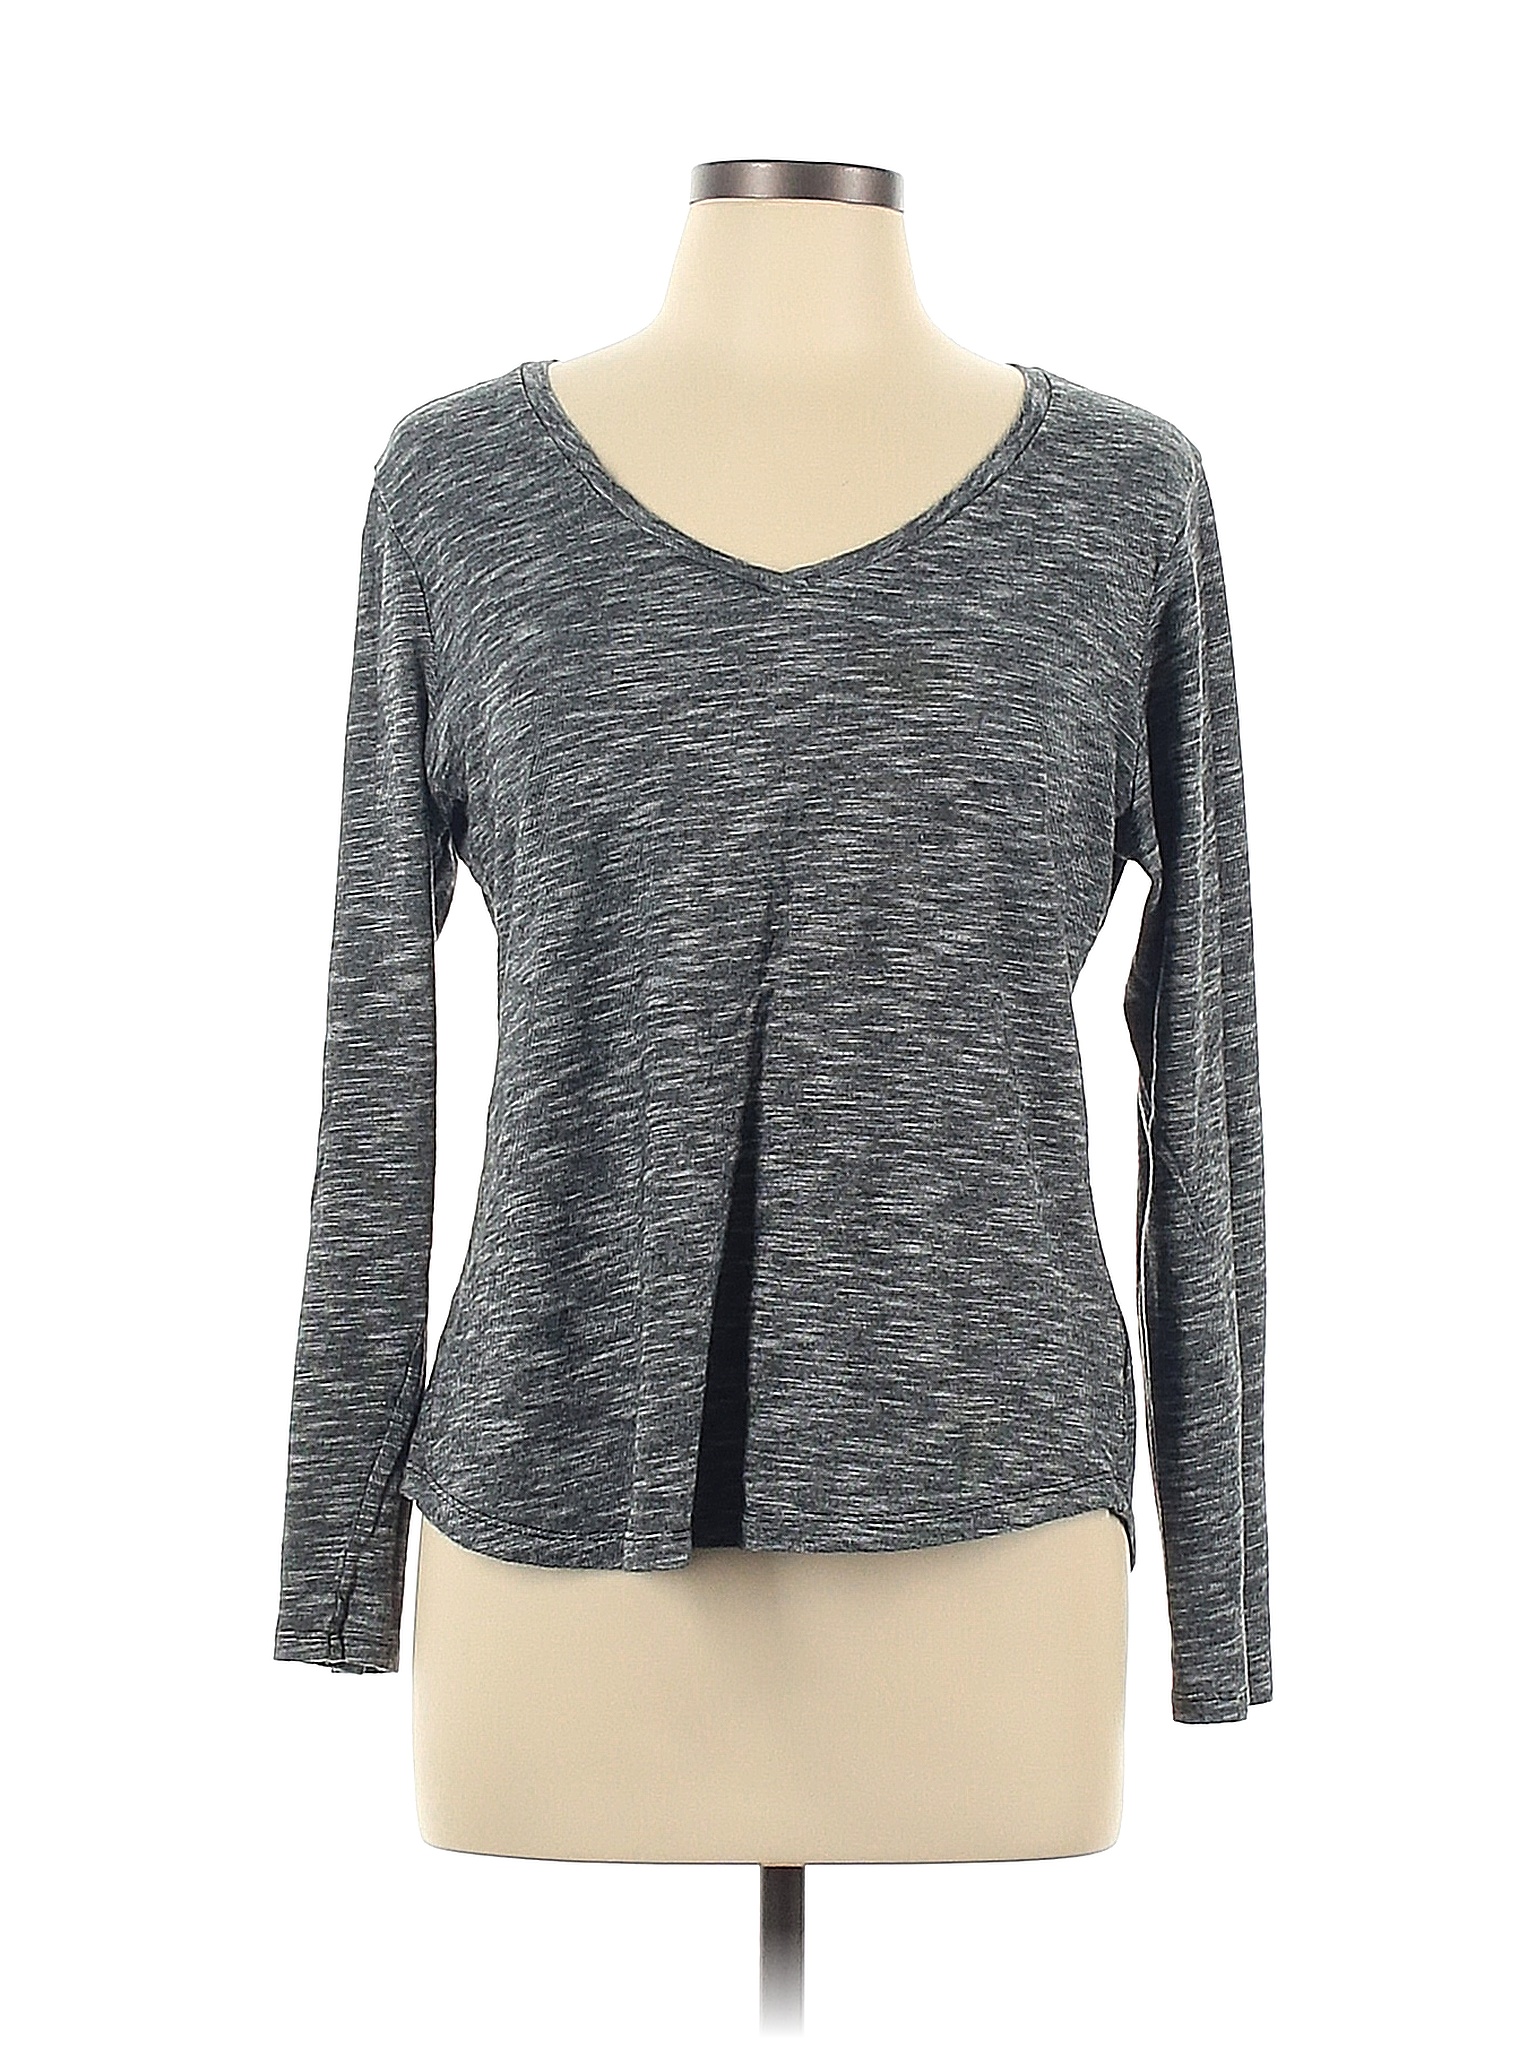 Old Navy Color Block Marled Gray Long Sleeve T-Shirt Size L - 52% off ...